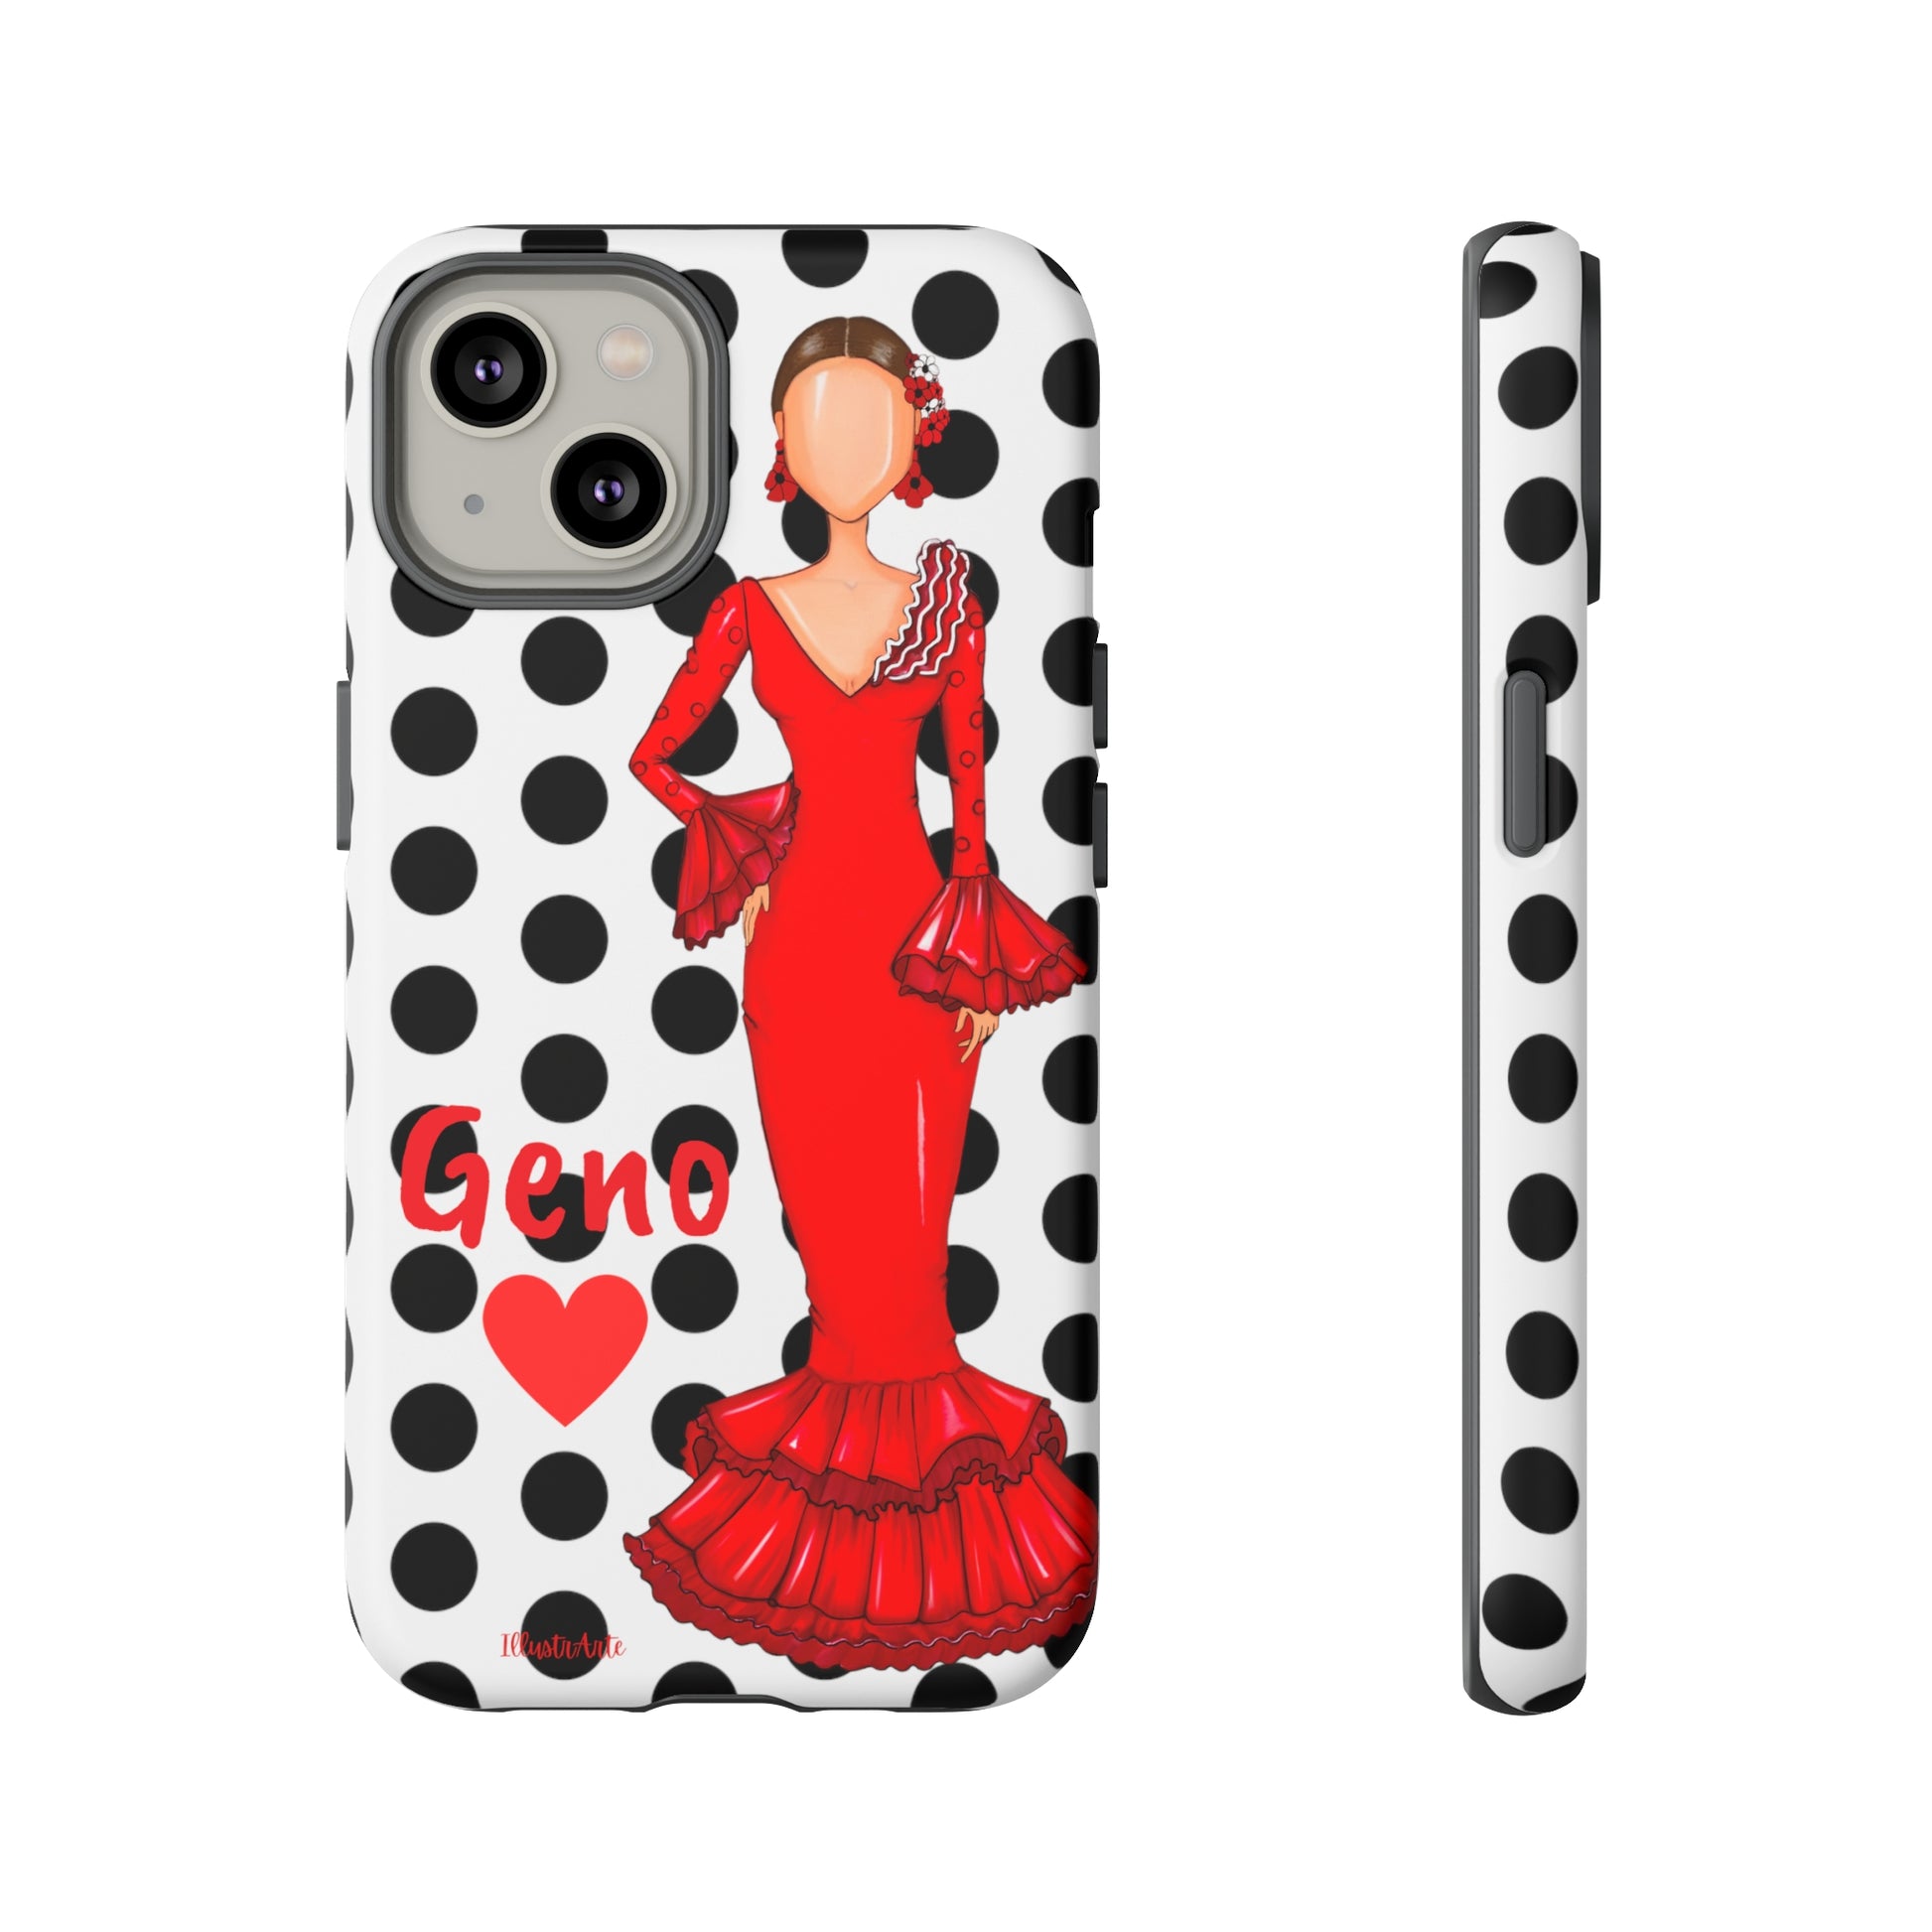 a polka dot phone case with a woman in a red dress